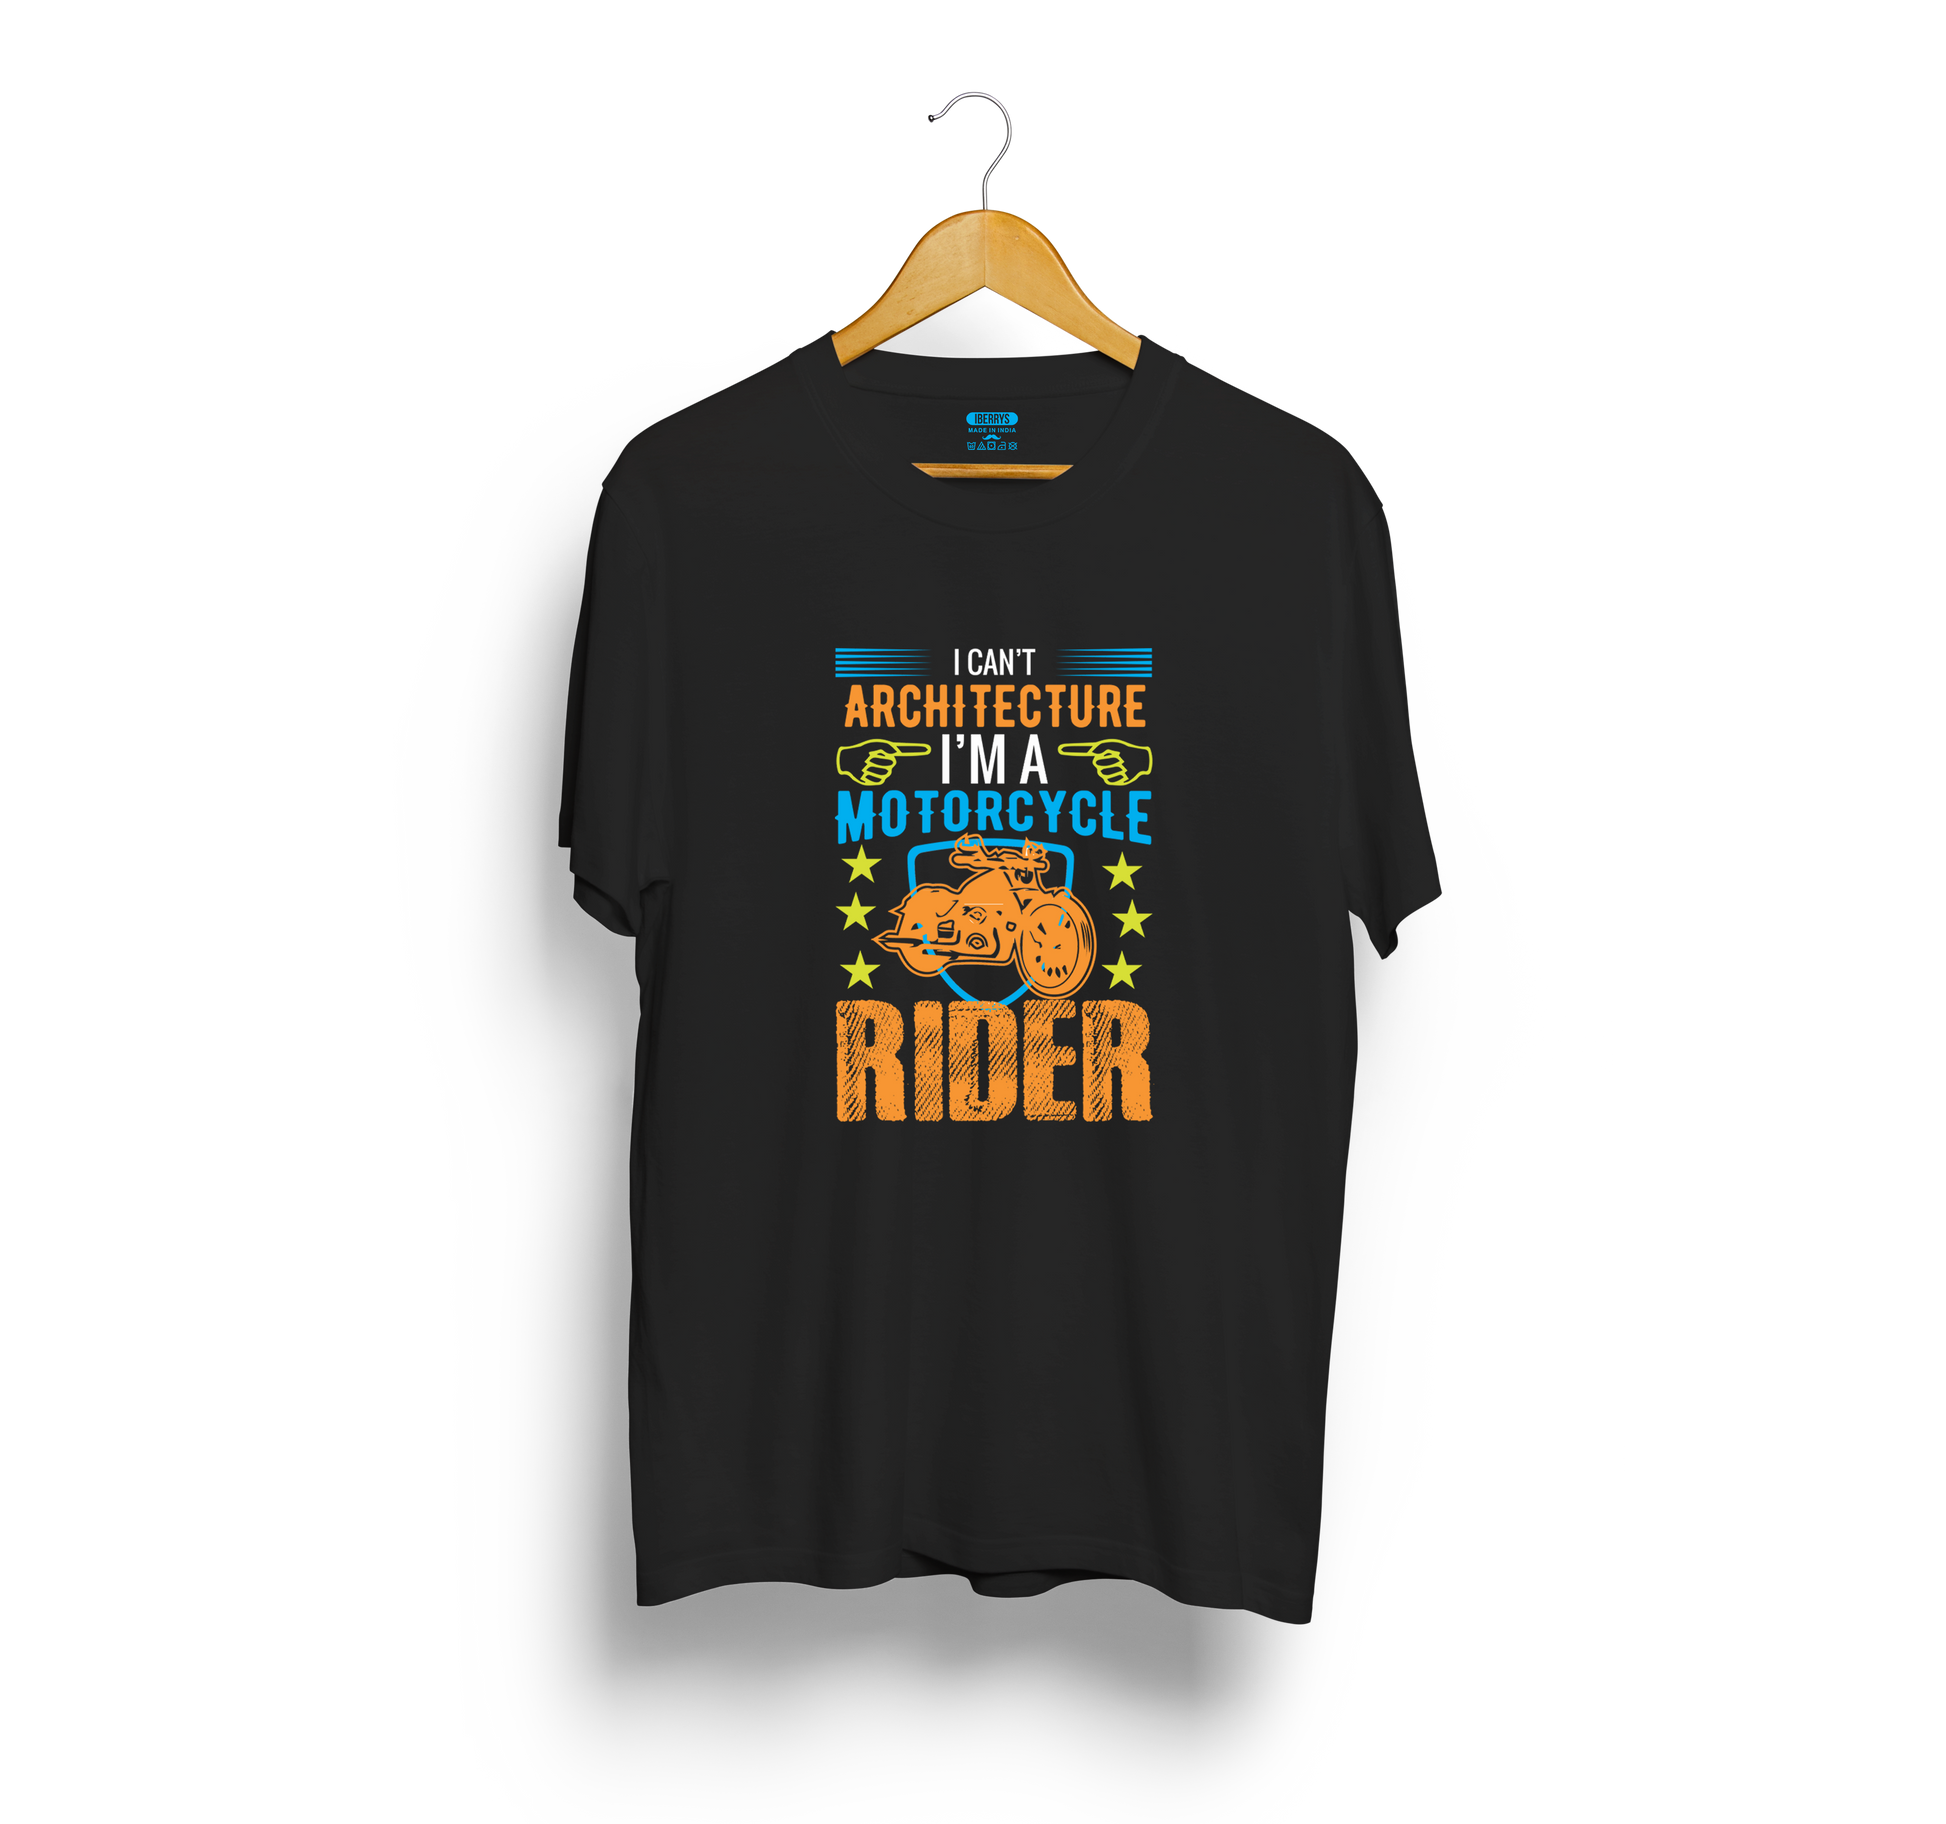 I can't architecture, I am a rider quote Biker t shirts - Black